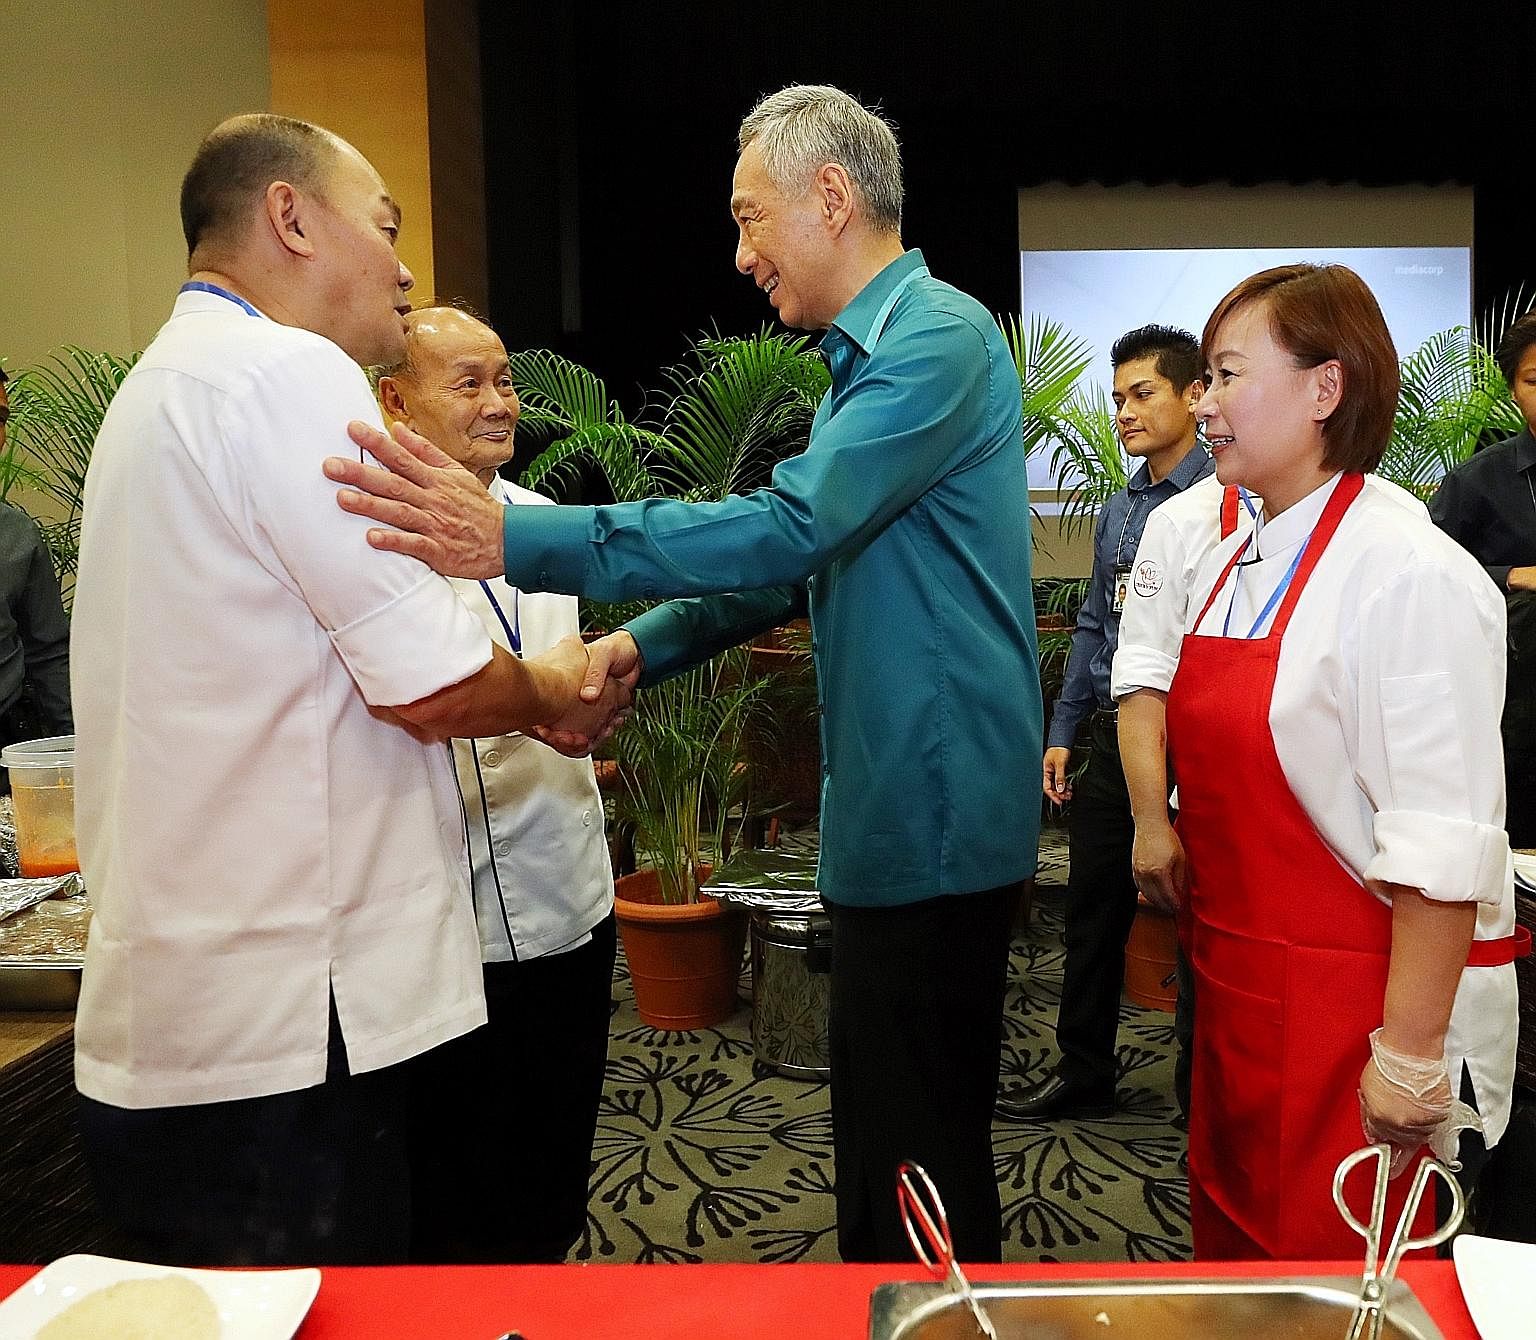 Prime Minister Lee Hsien Loong with Mr Raymond Kiang (far left), 57, who sells chicken rice at Our Tampines Hub, his father Kiang Joon Toh, 70, one of the pioneer chefs who developed Chatterbox chicken rice at Mandarin Hotel, and sister Susan. Singap